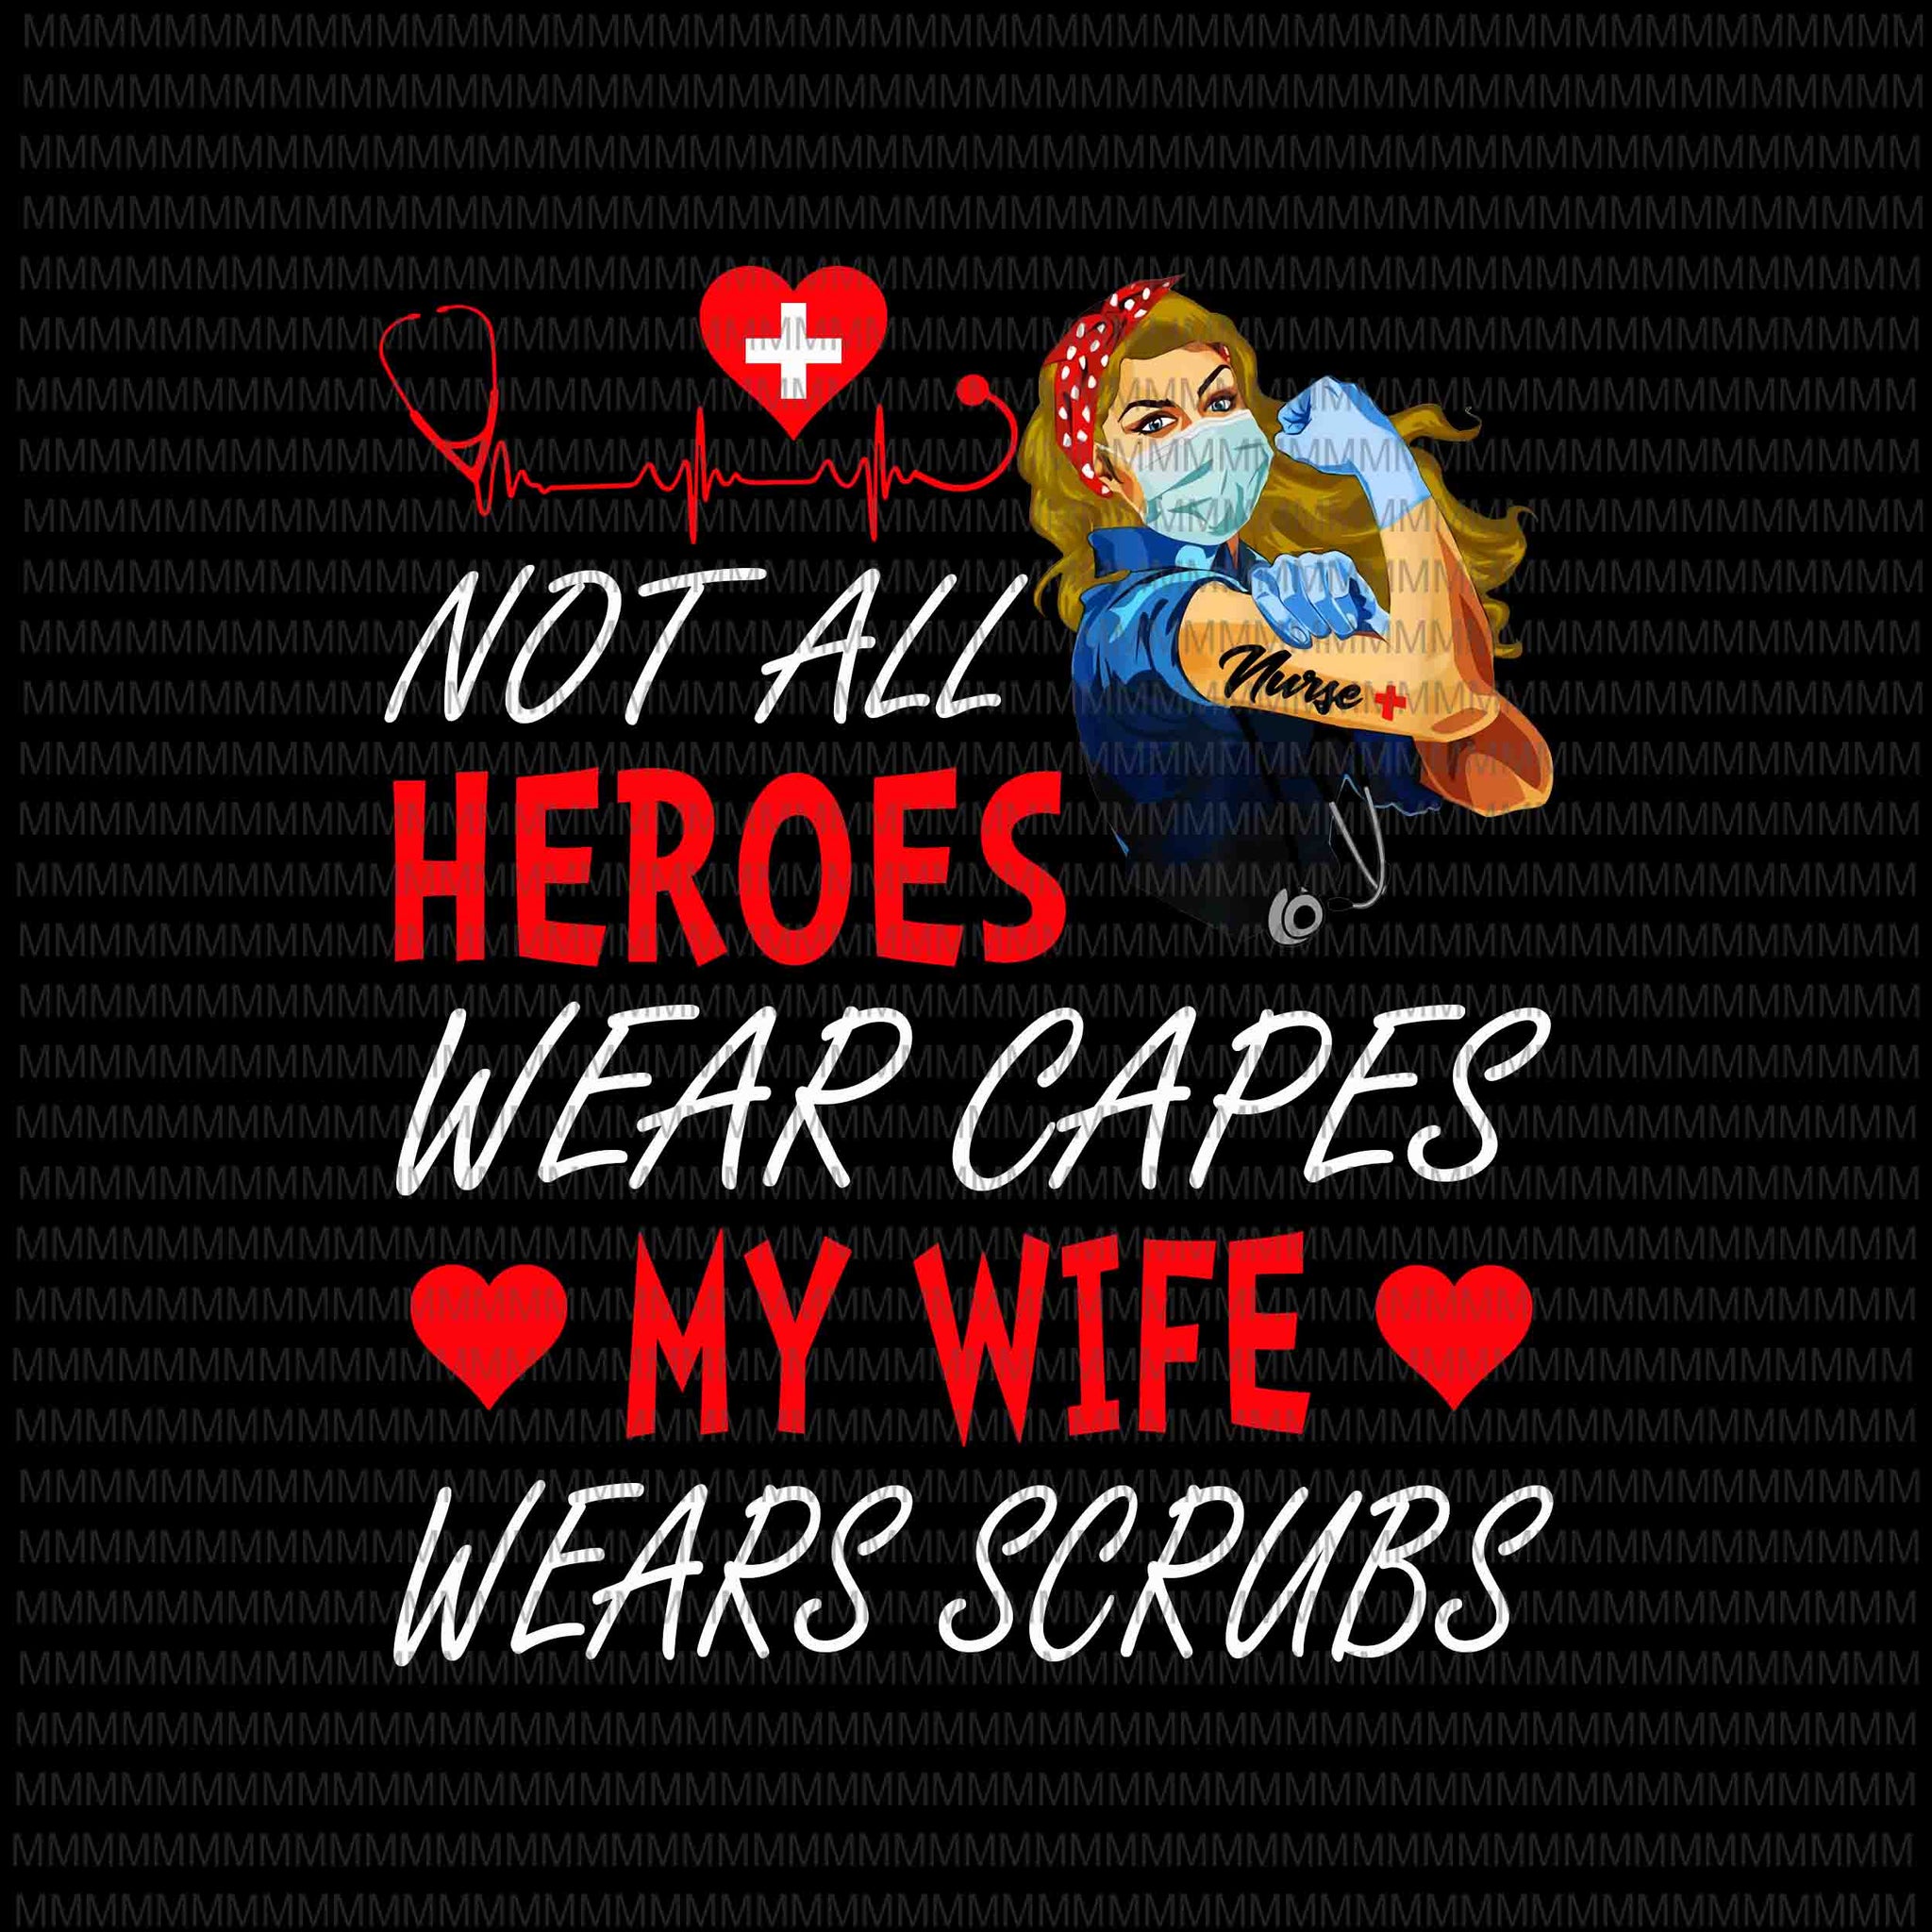 Copy of Nurse vector, Not All Heroes Wear Capes My Daughter My Daughter Wears Scrubs, Png, Jpg, Vector print ready t shirt design